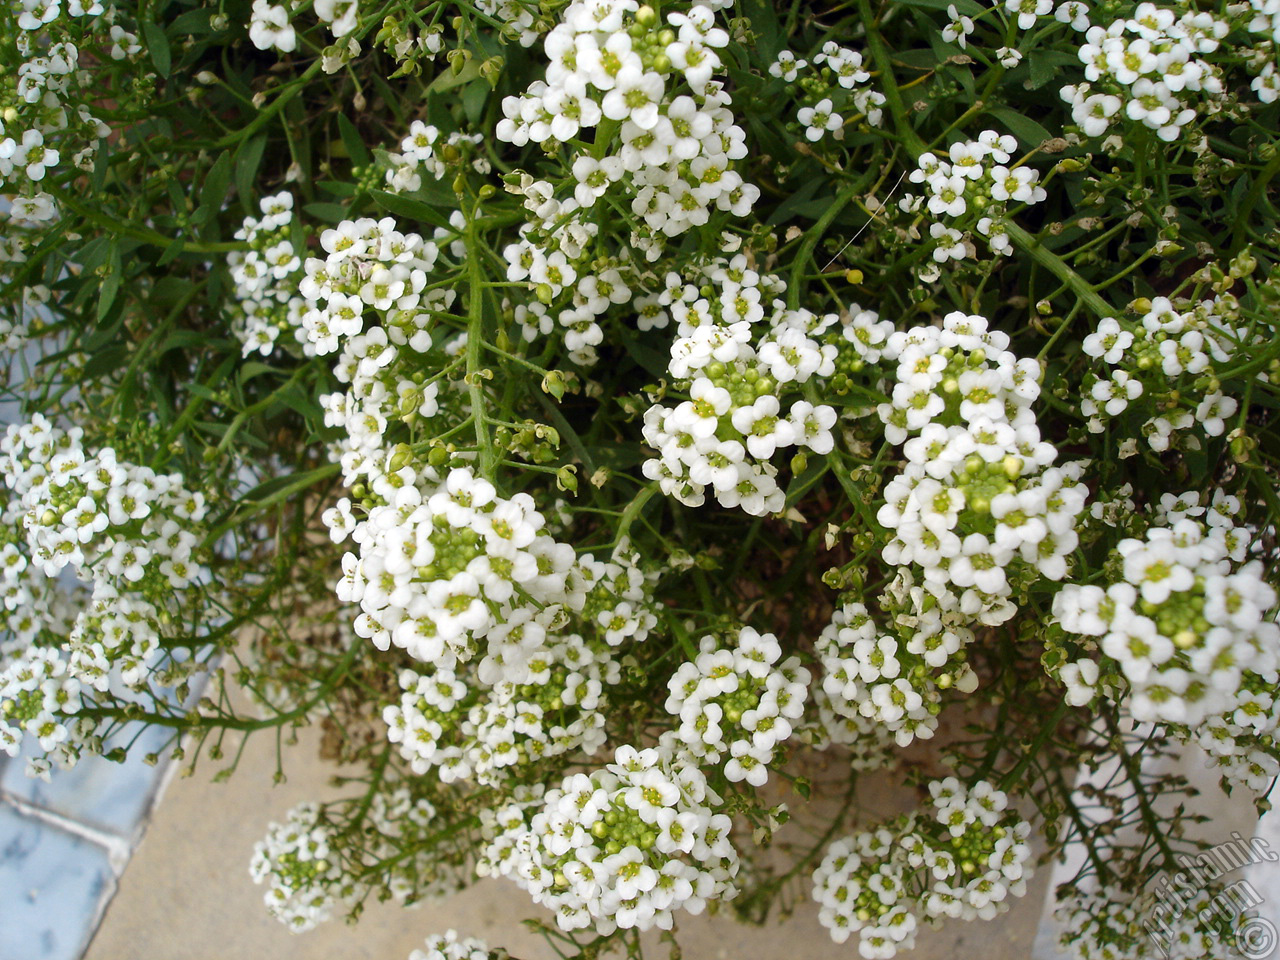 A plant with tiny white flowers.
